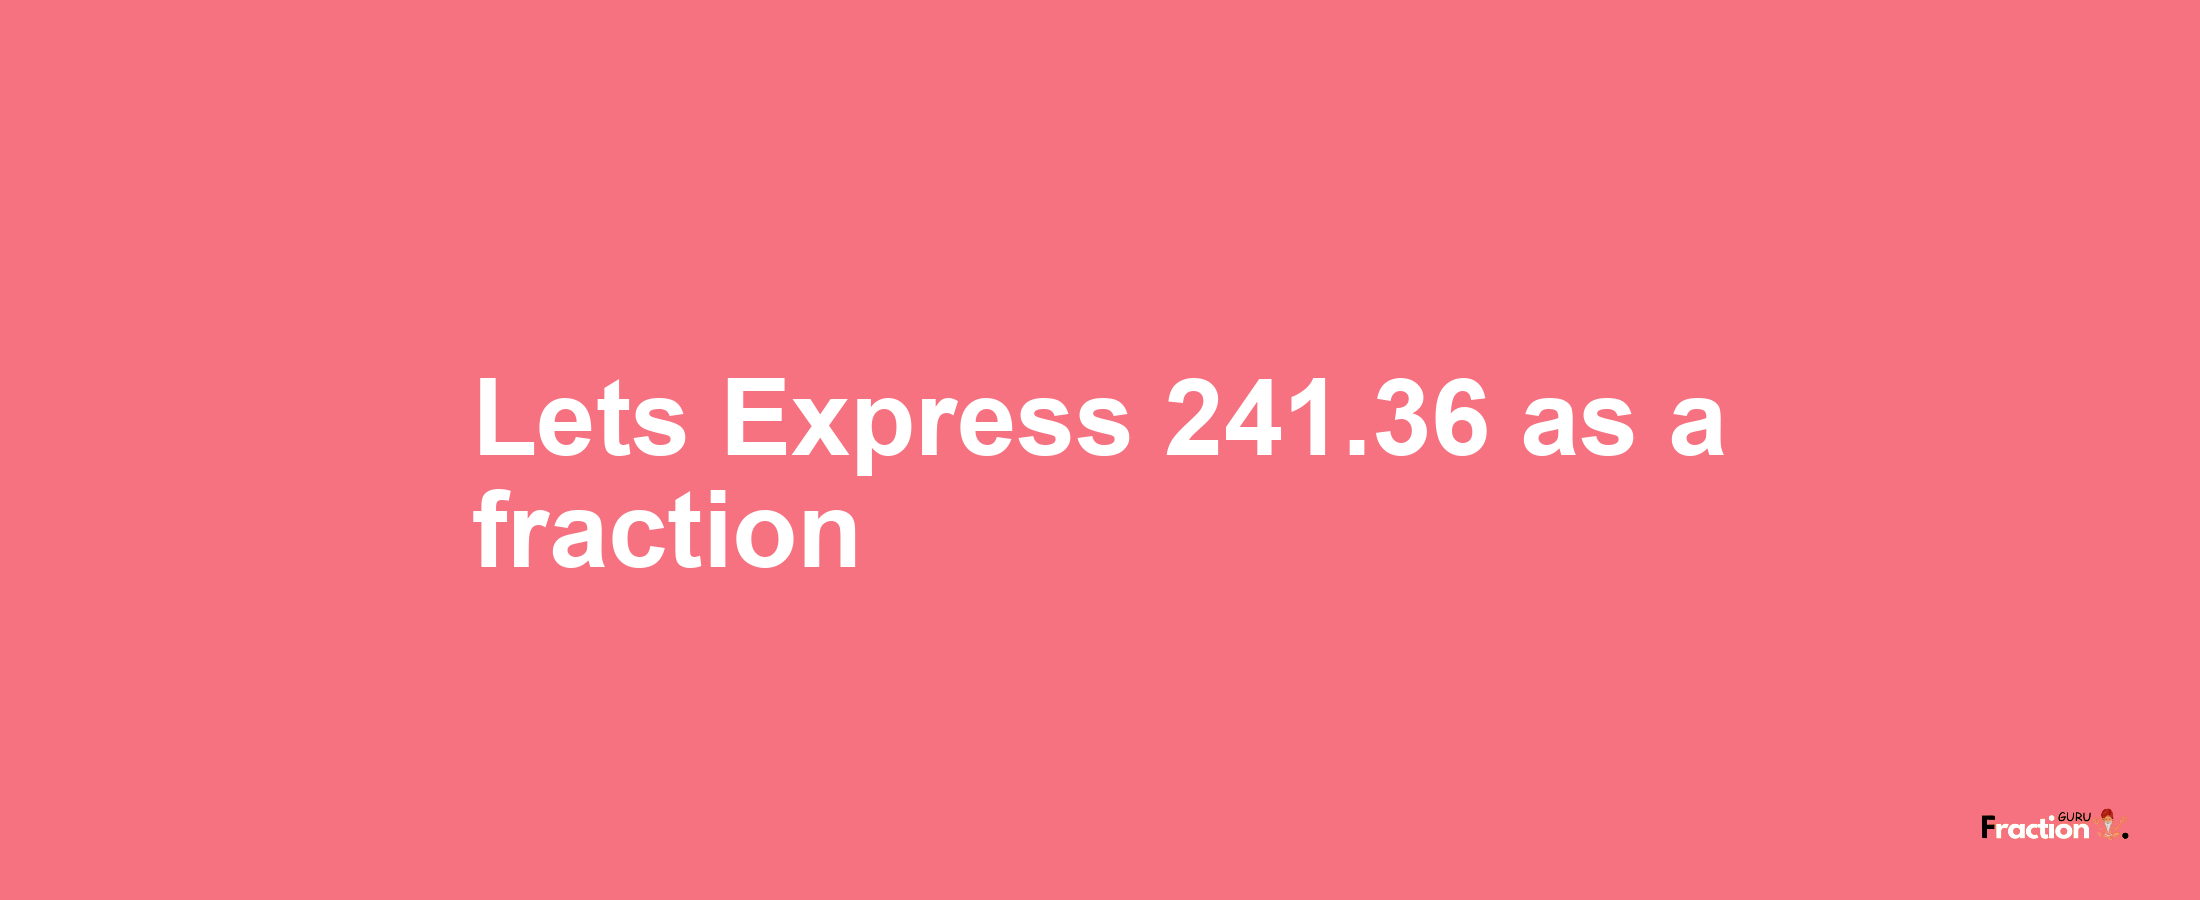 Lets Express 241.36 as afraction